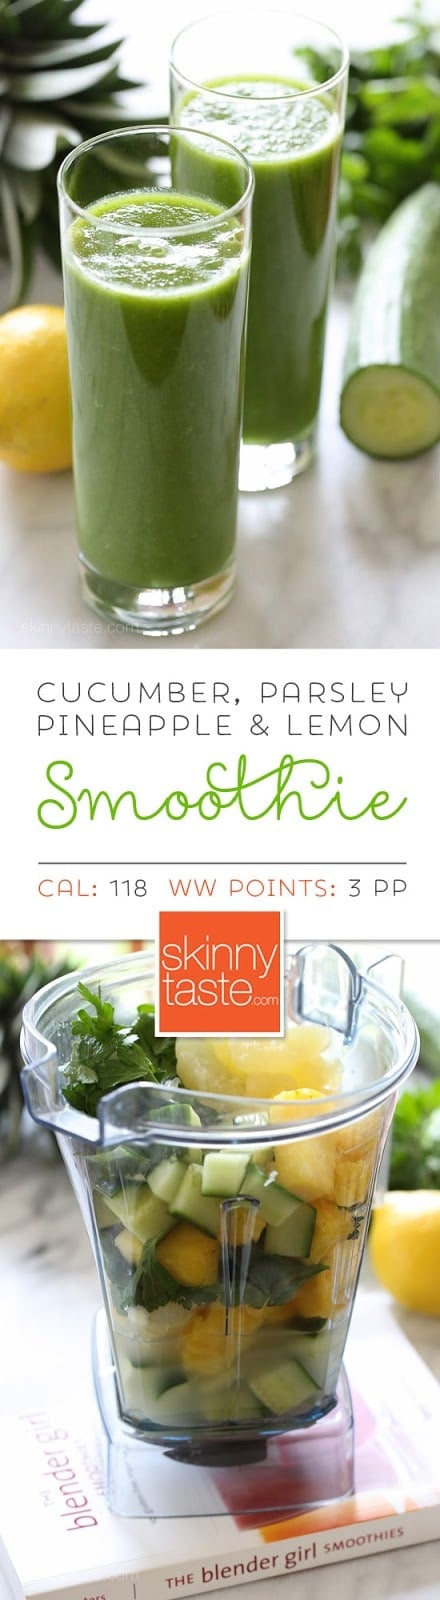 Cucumber, Parsley, Pineapple and Lemon Smoothie – not just delicious, it's also dairy-free, paleo and vegan